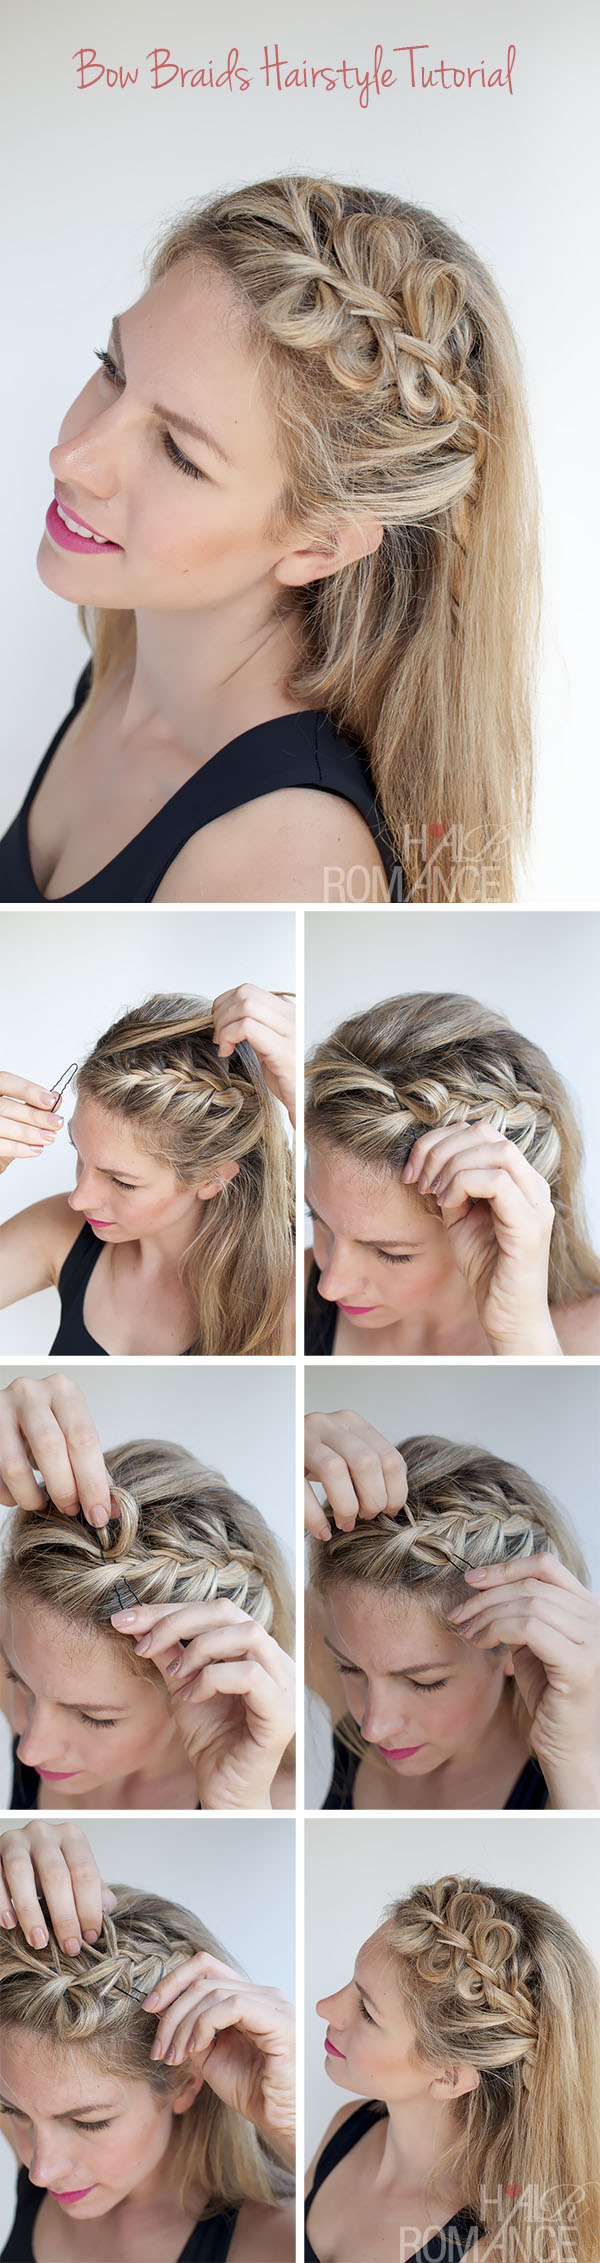 Cute and Easy Hairstyle Tutorials You Must See - fashionsy.com